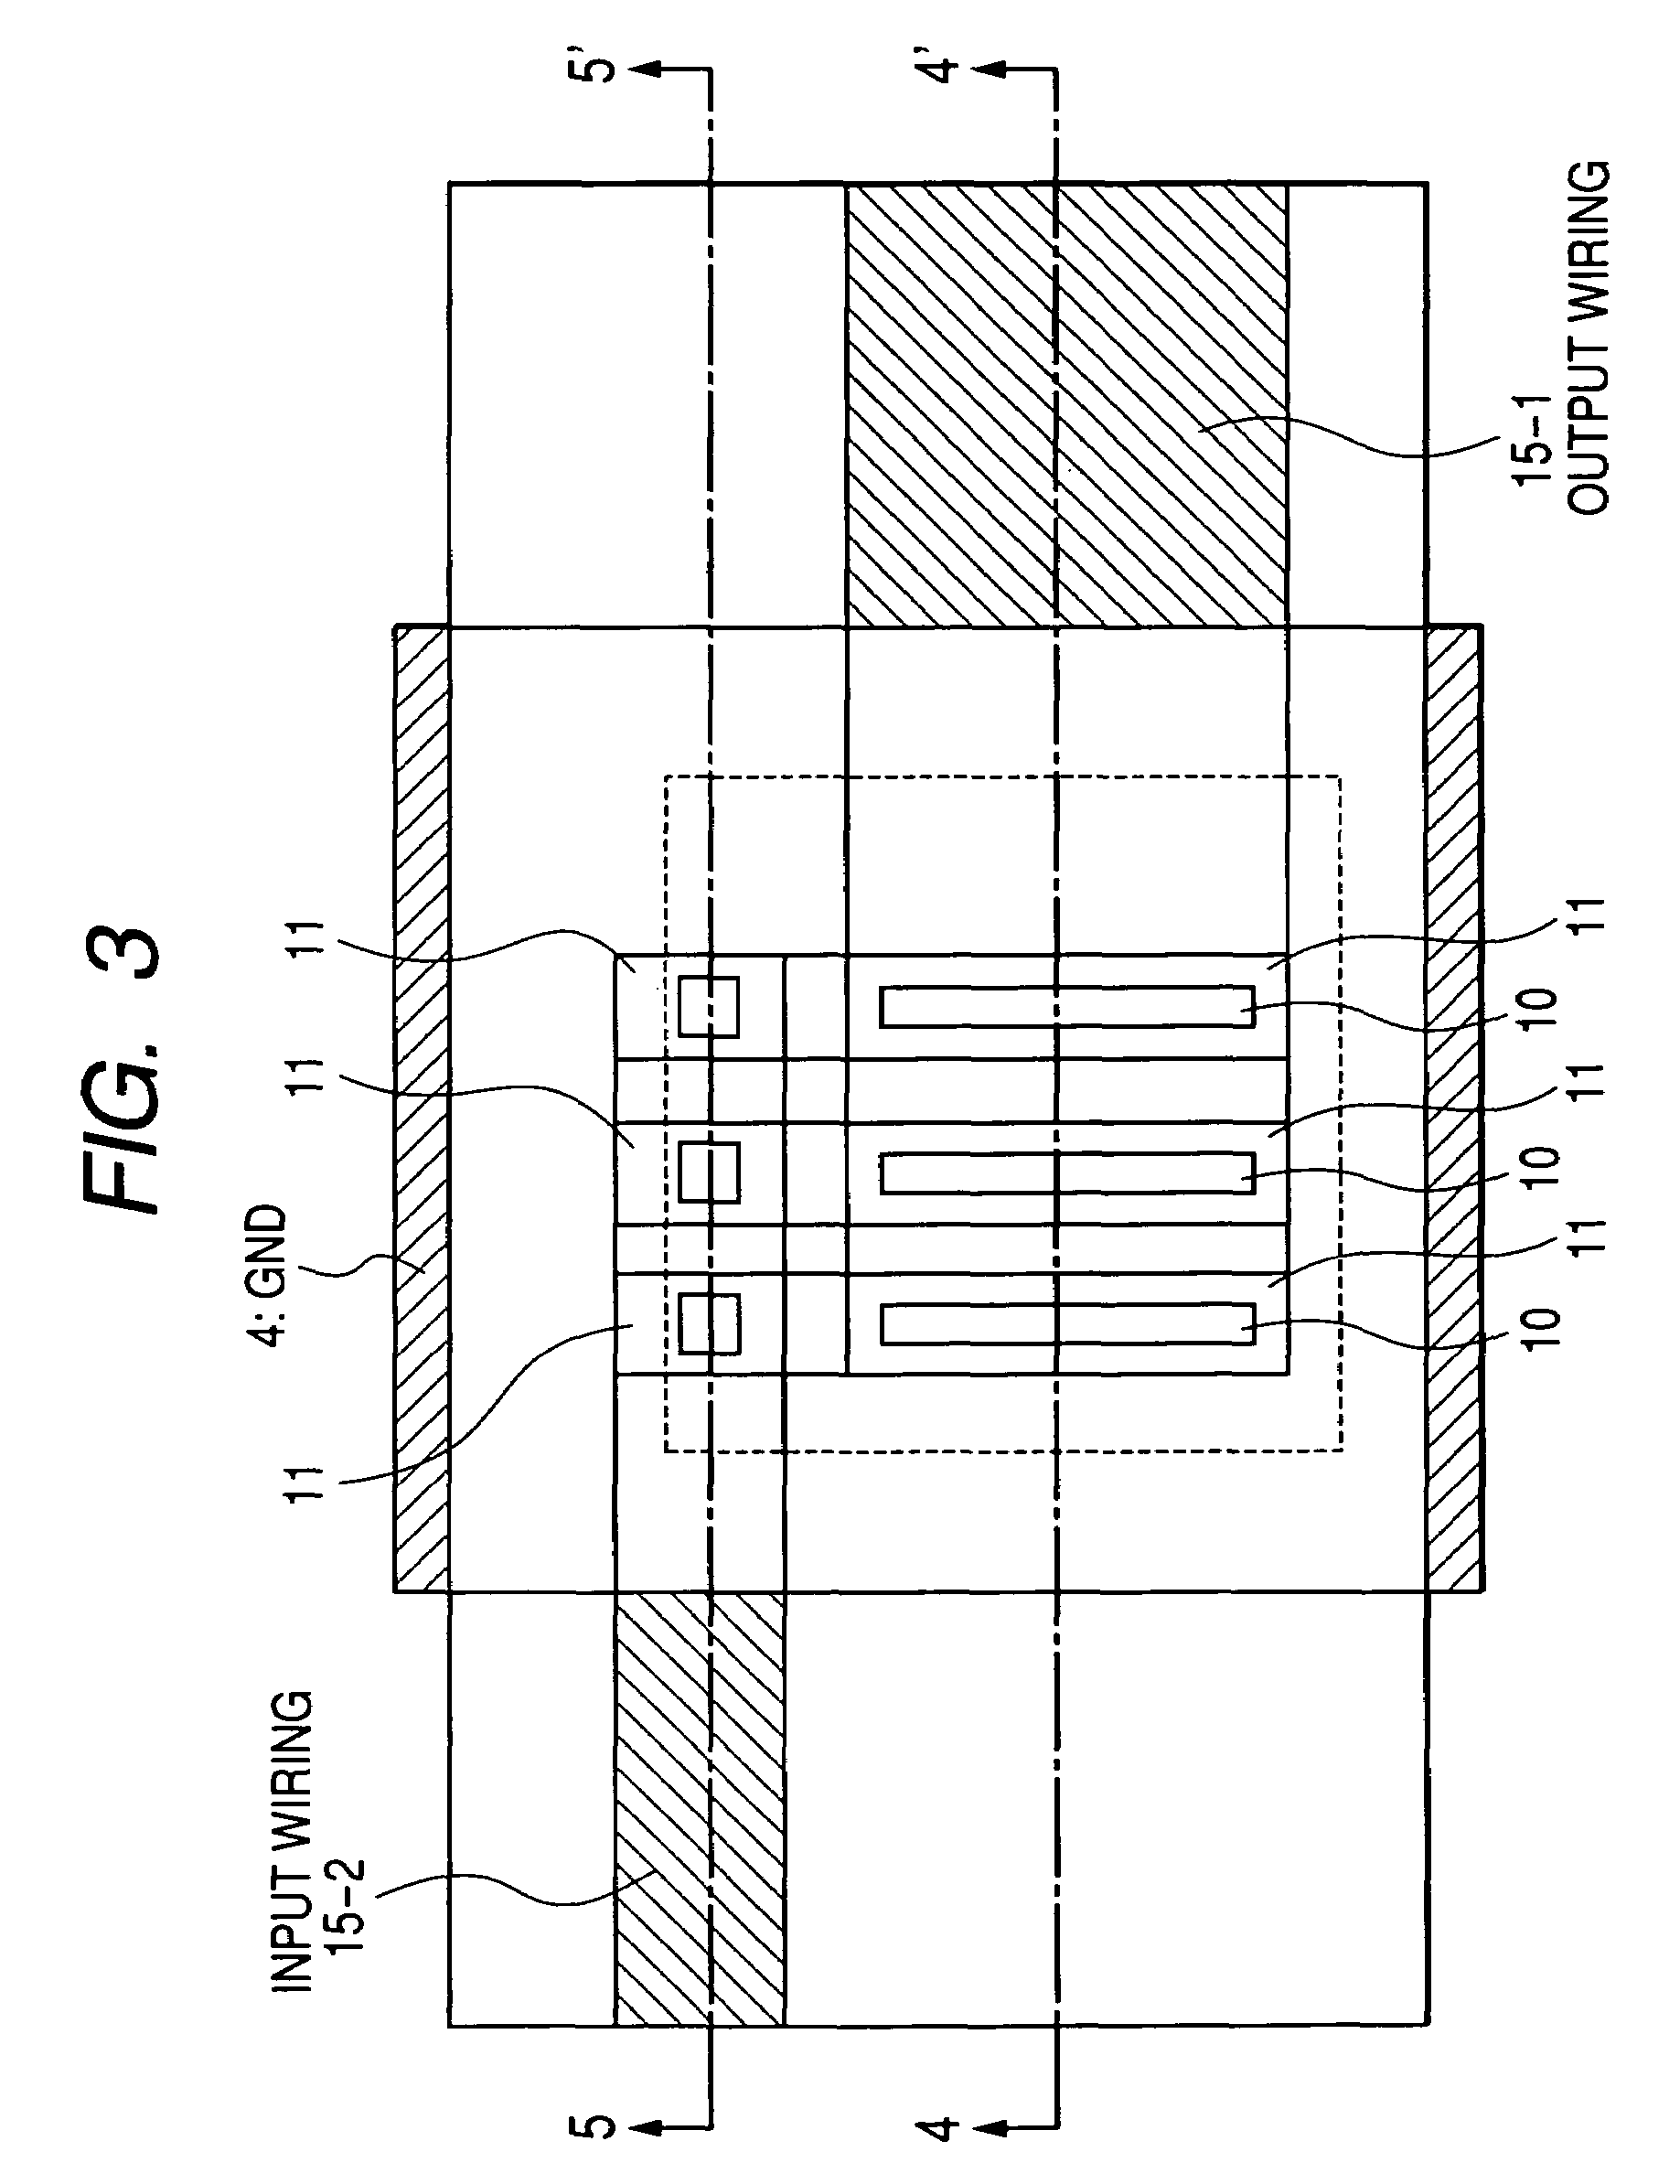 Semiconductor HBT MMIC device and semiconductor module